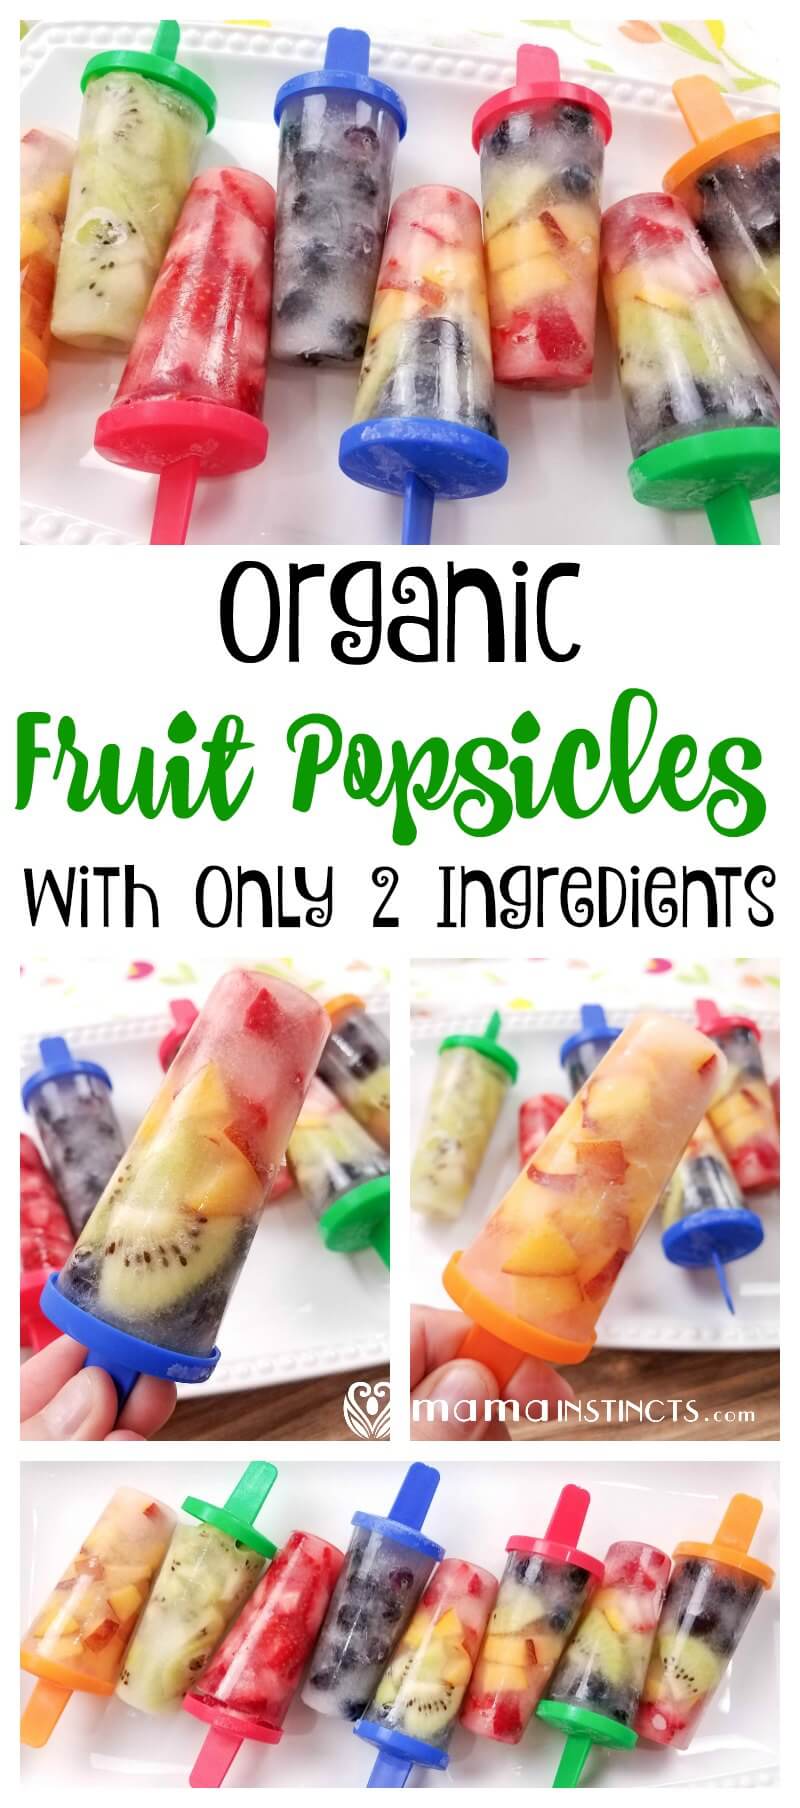 Try this perfect summer treat for kids, made only with two organic ingredients. These fruit popsicles make a great snack and are so refreshing on a hot summer day.